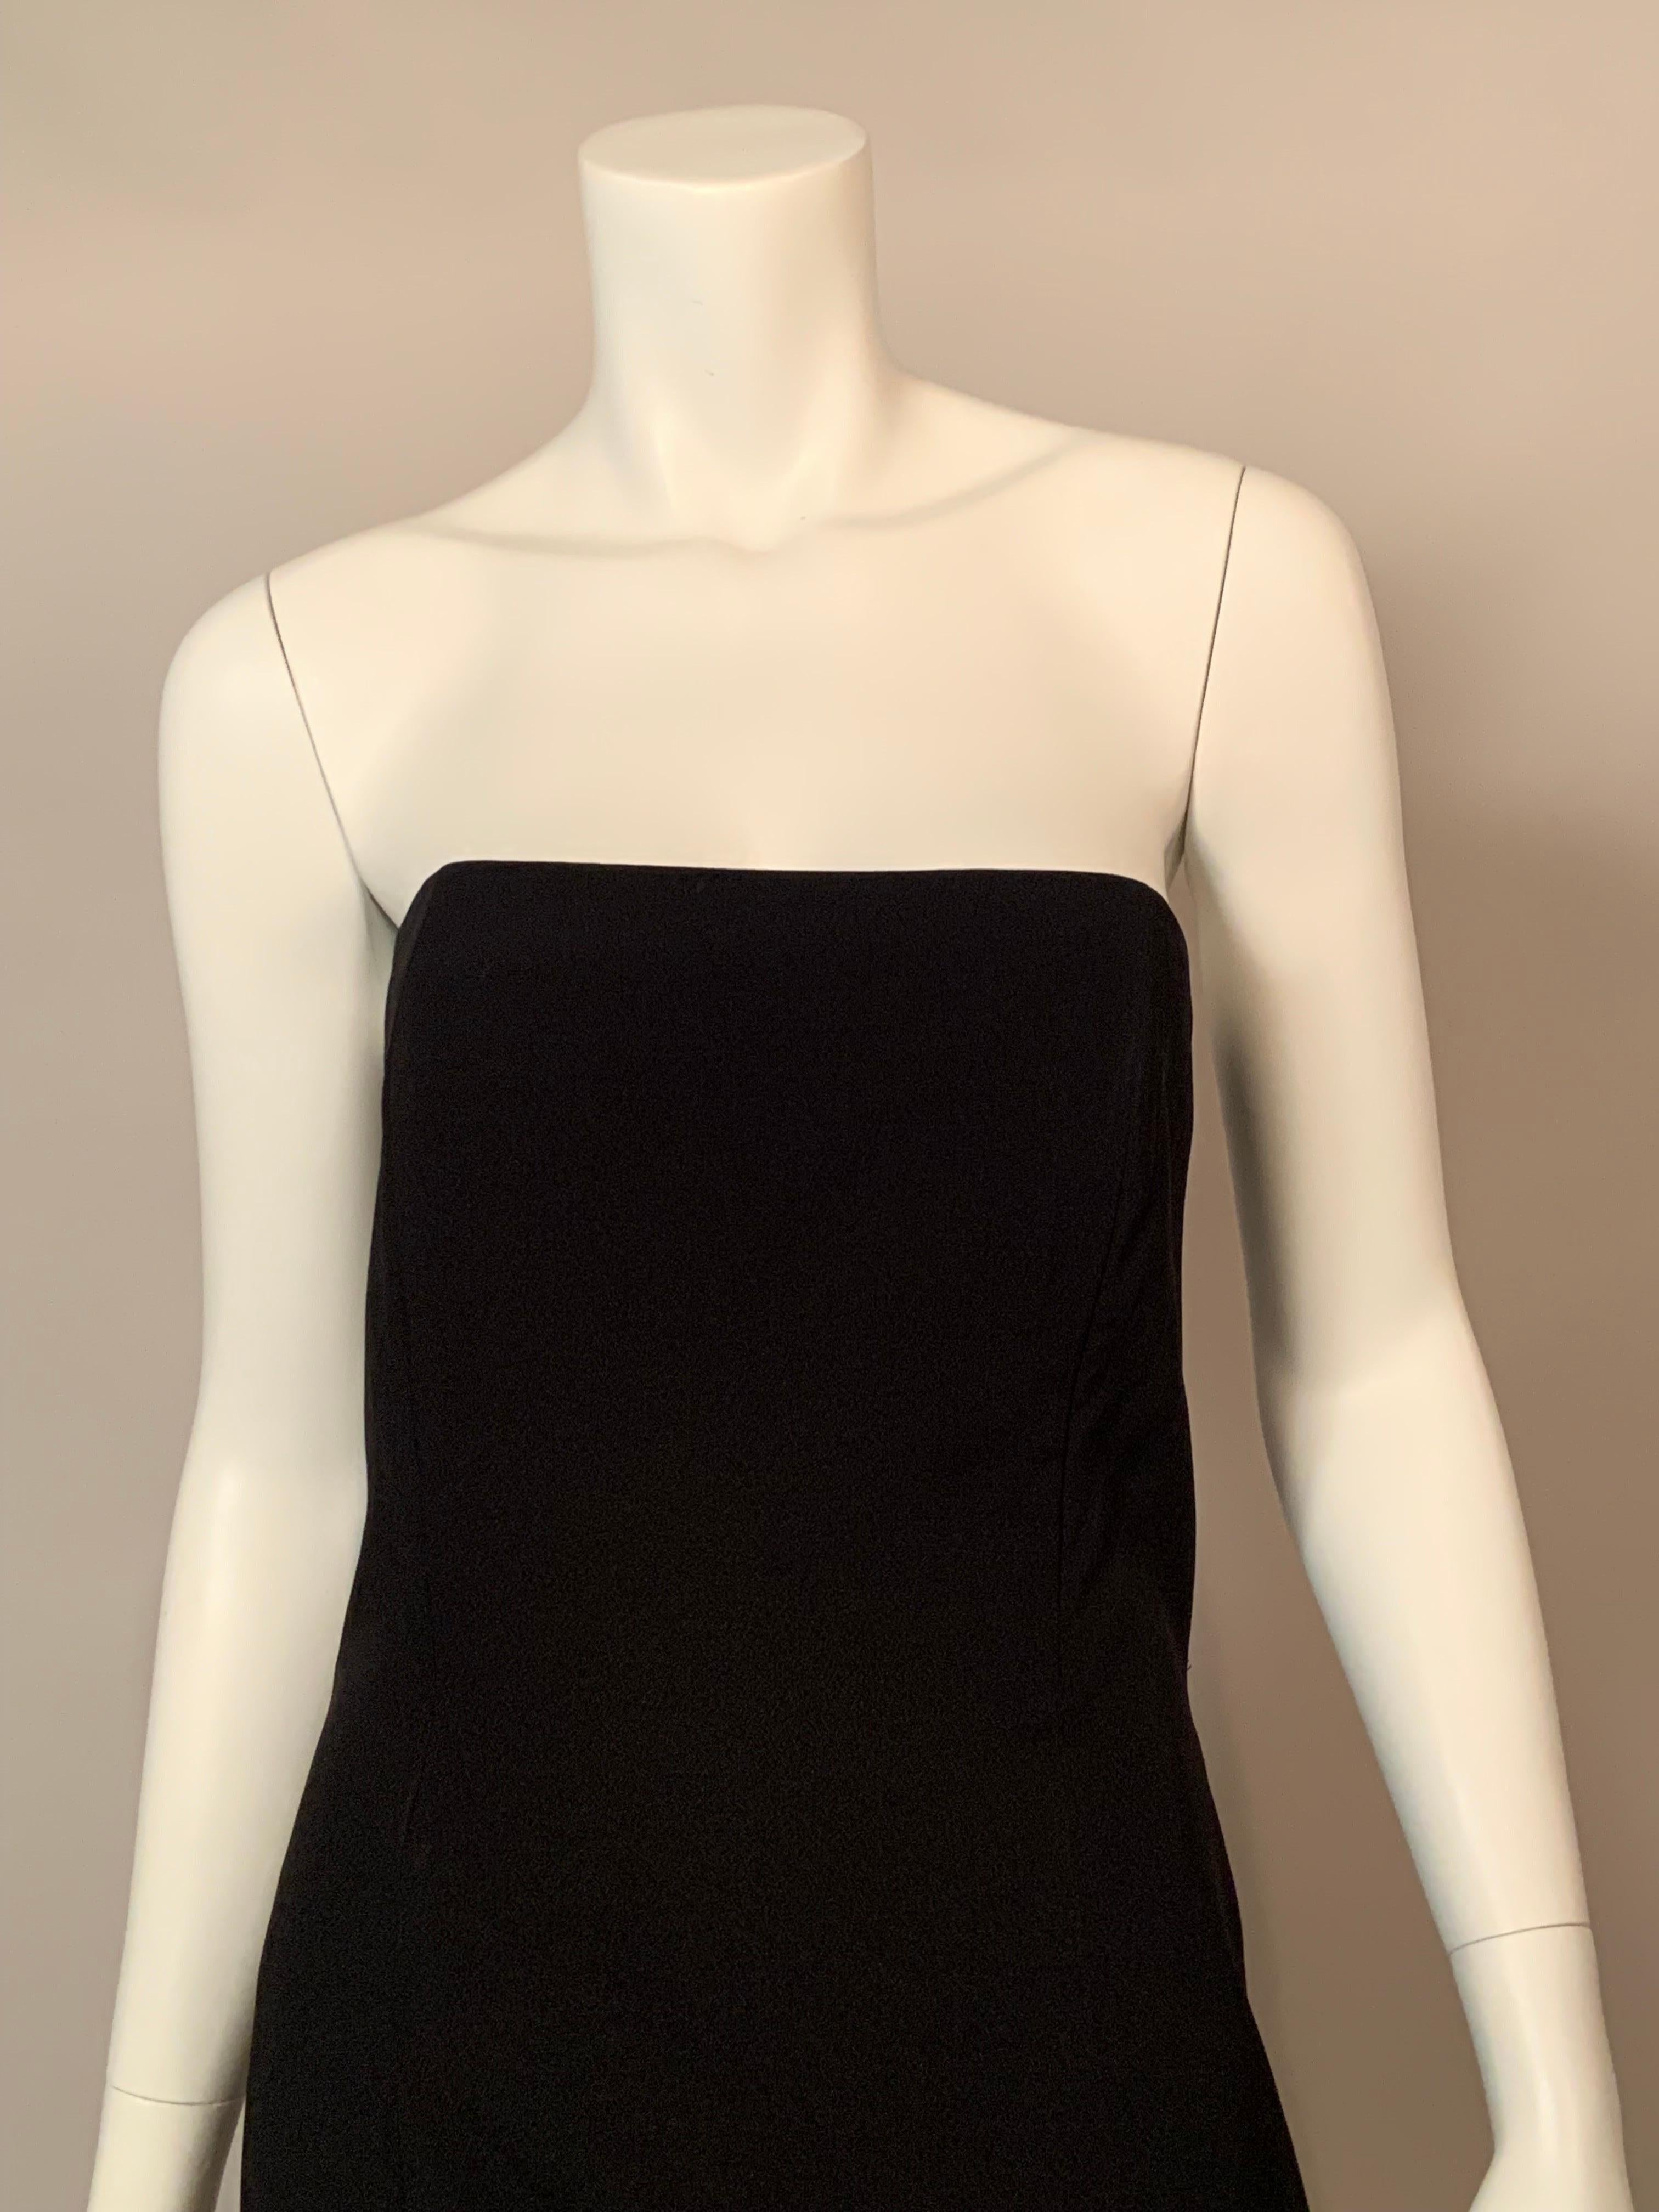 Carolina Herrera Has designed a classic strapless evening dress with a boned bodice and a slightly flared skirt below the knee. This piece was a sample from her CH line. This dress is a perfect base for accessories or glamorous jewelry. It has a